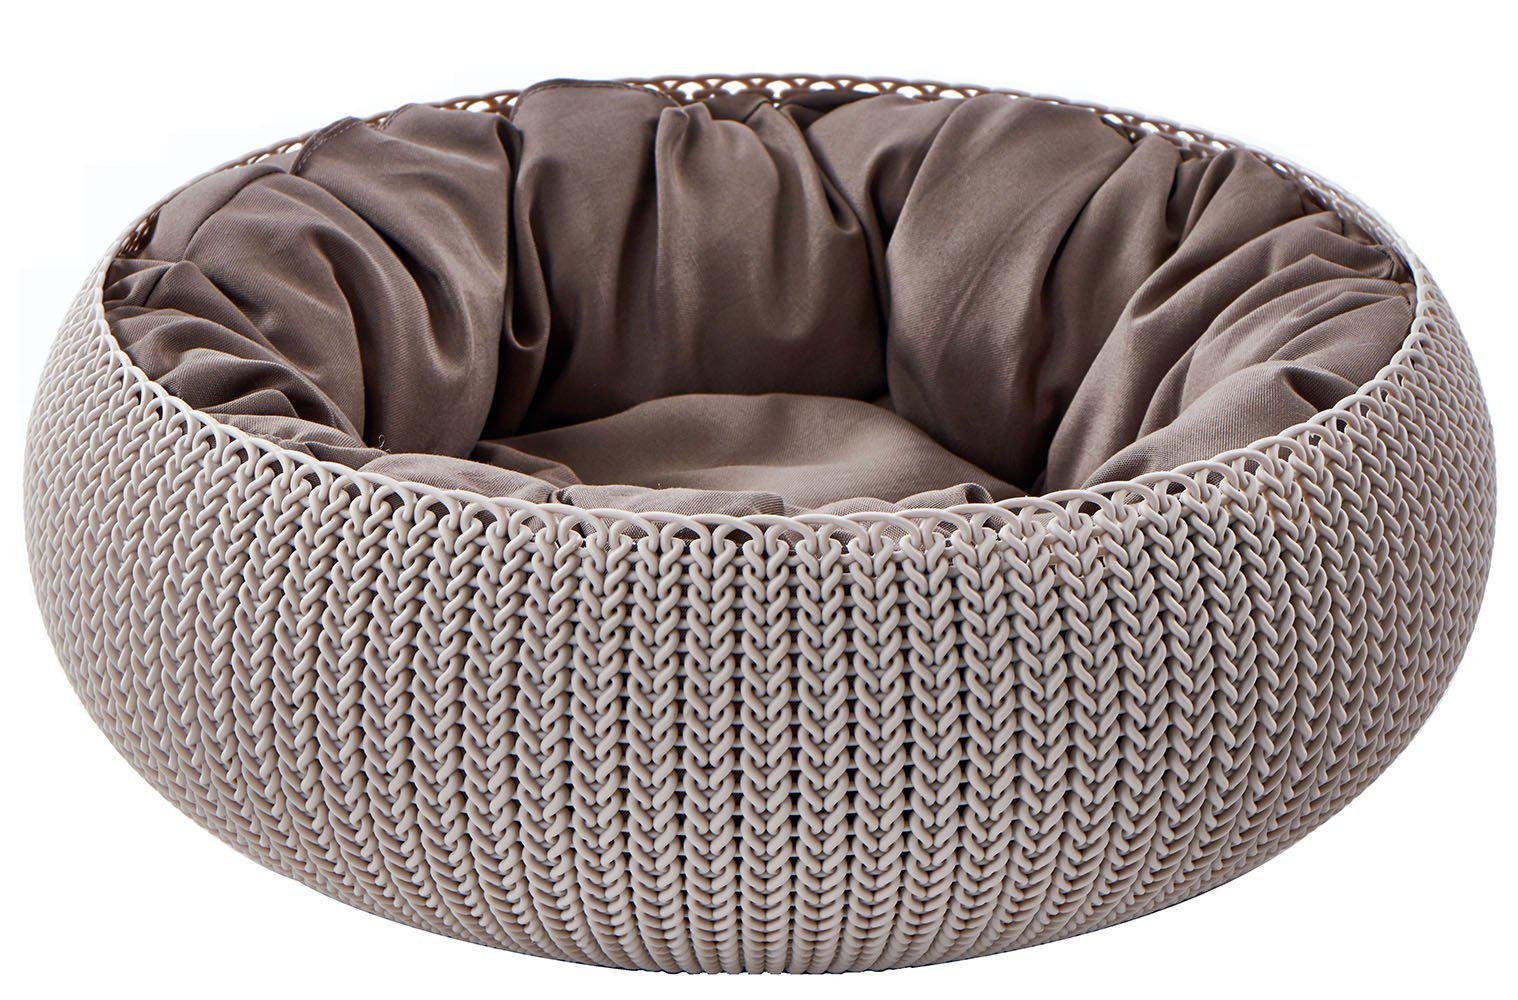 keter by curver knit cozy resin plastic pet bed, cat bed & dog bed with cushion, small dogs to medium cats, sandy beige